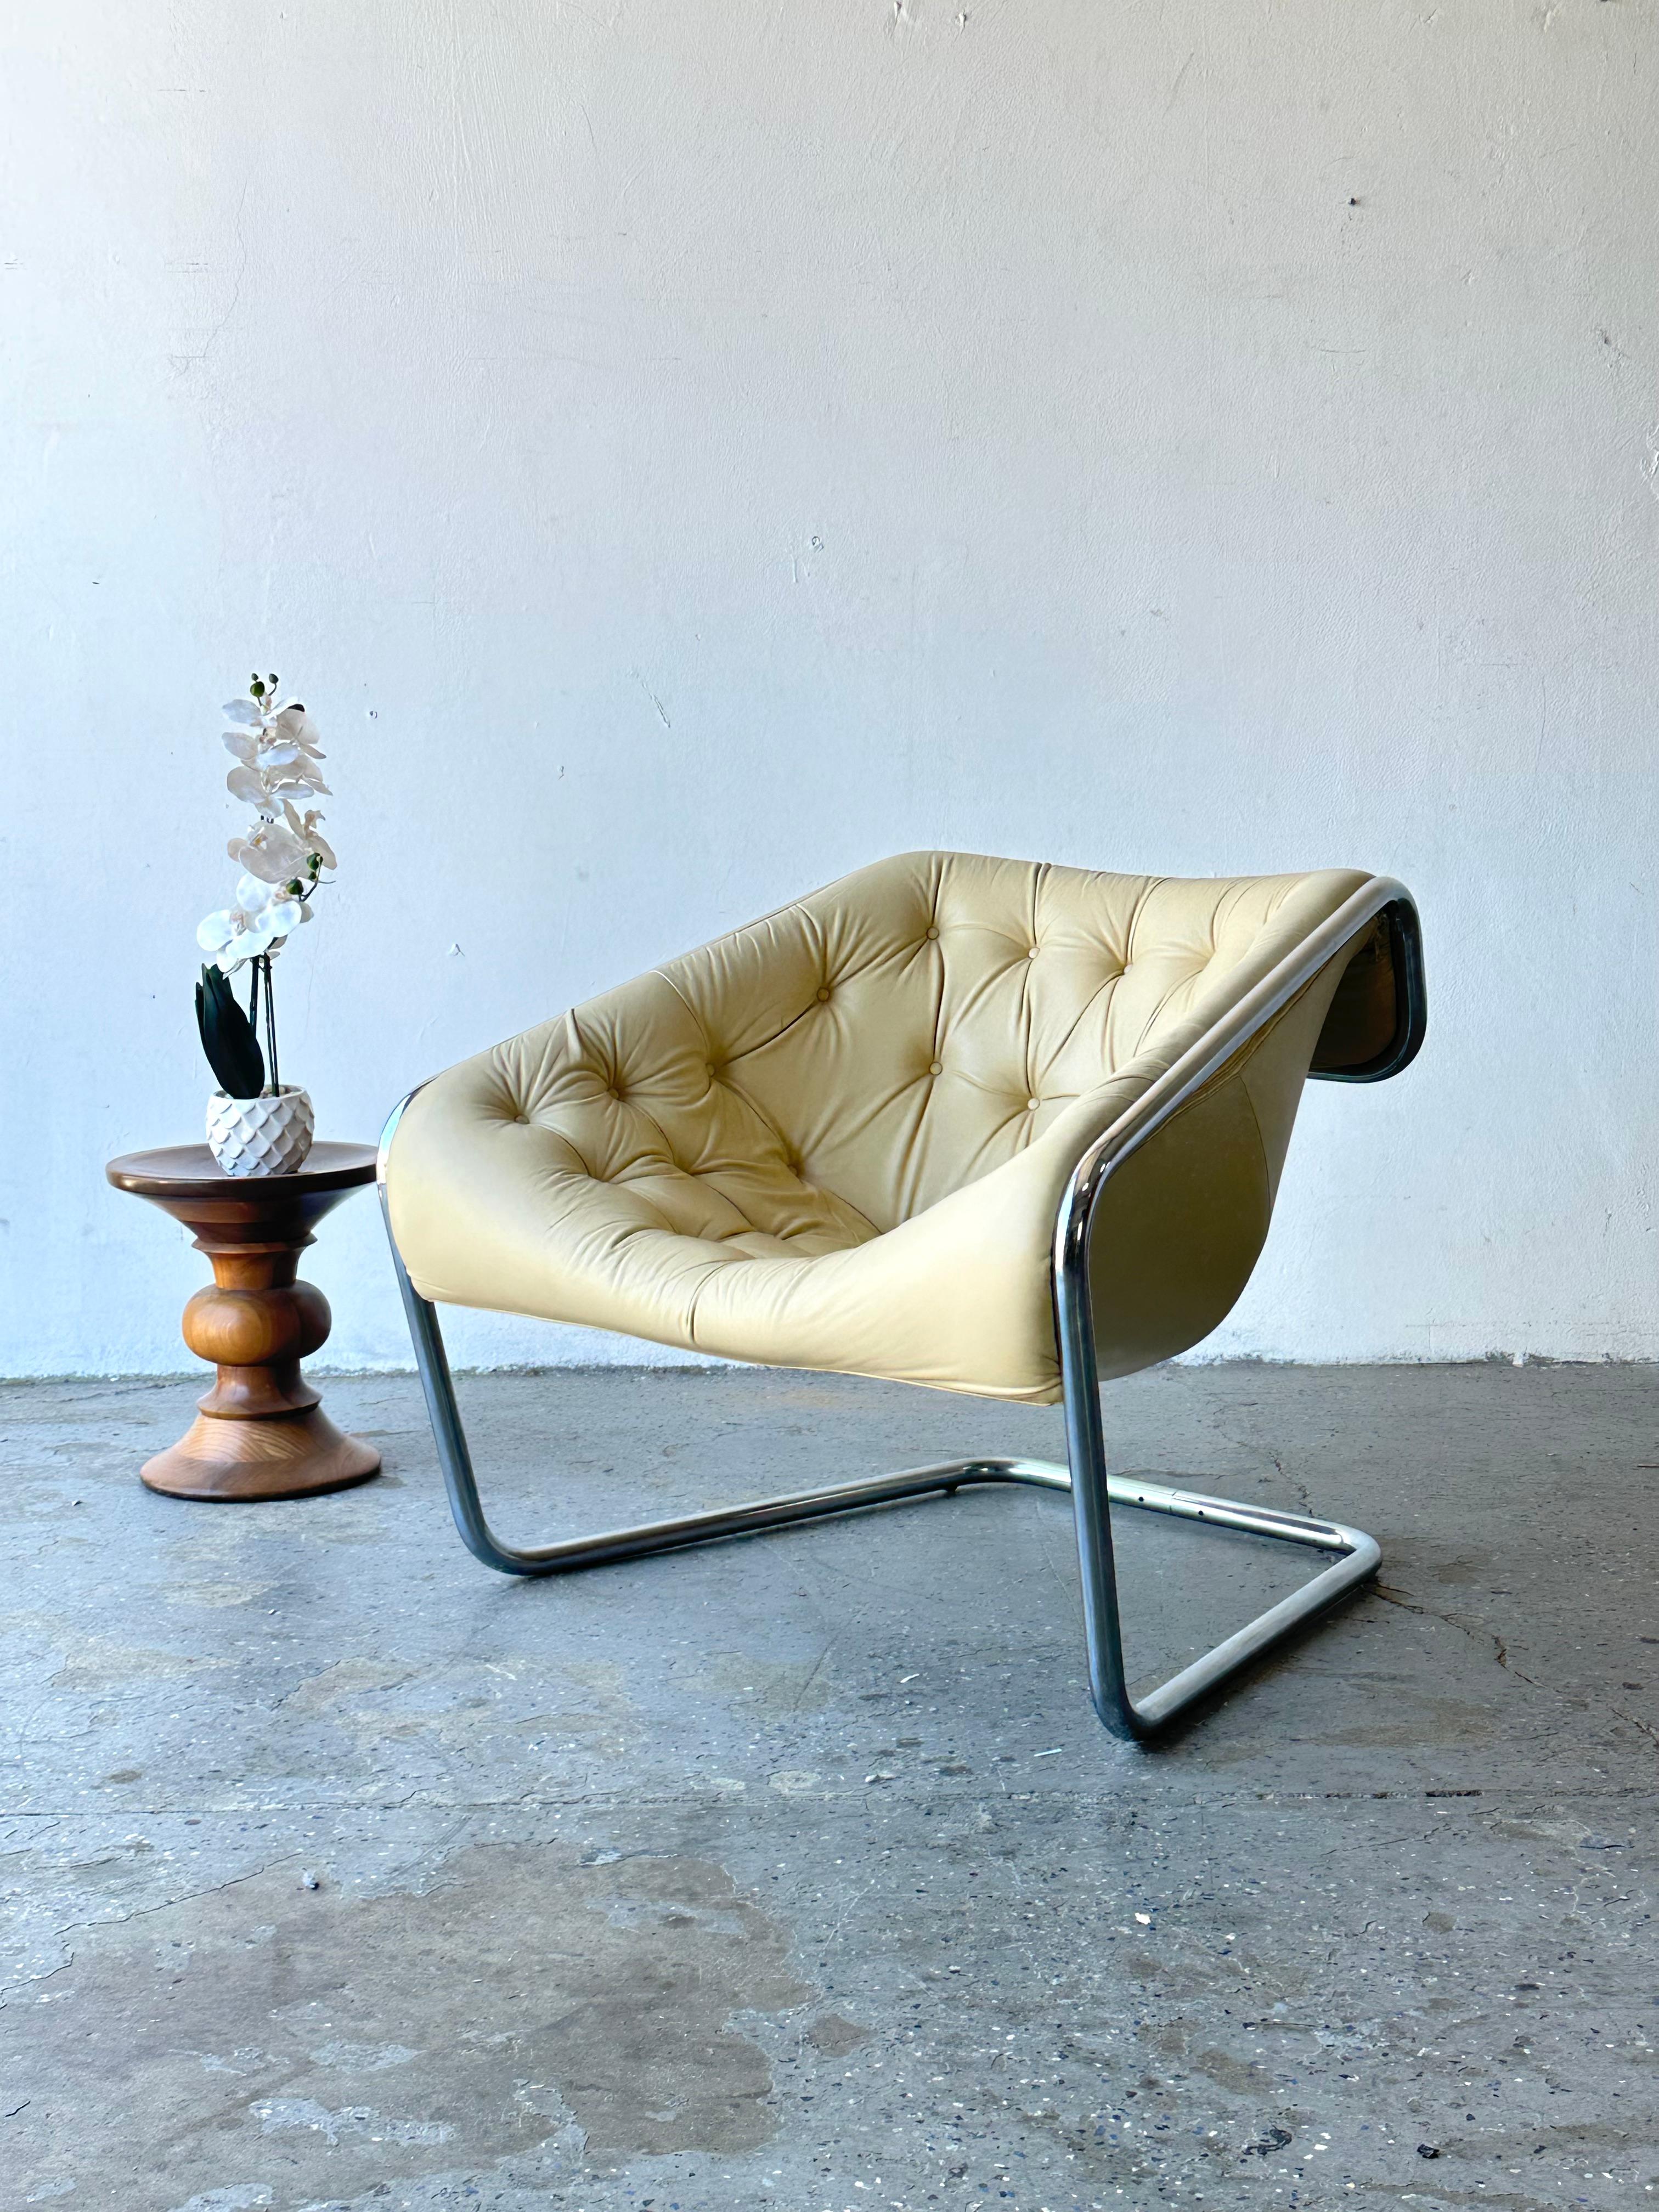 Rare Kwok Hoi Chan boxer lounge chair for Steiner, circa early 1970s, France. 

Cream padded leather and tubular chromed steel. Very unique and extremely comfortable seat, in good/ minty original condition. These are pretty rare In Europe and even